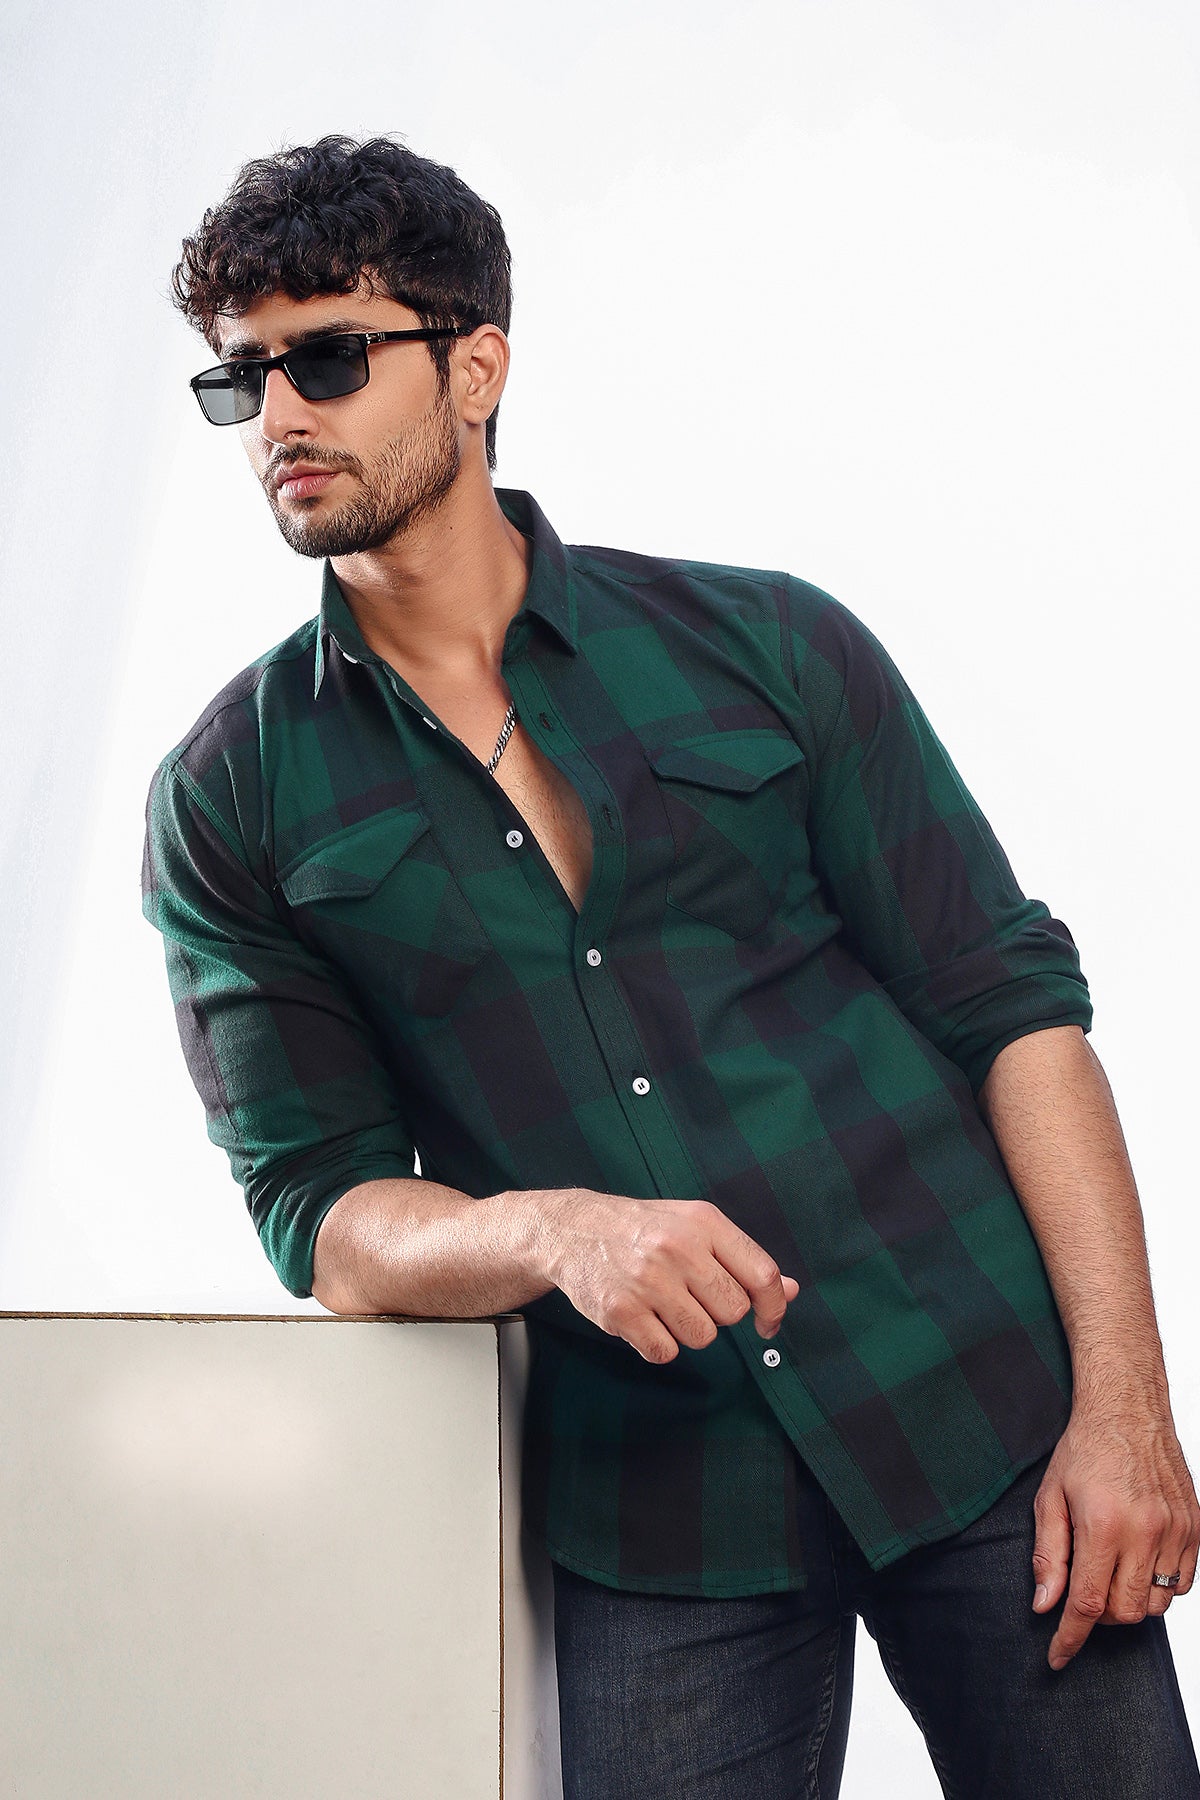 Flannel in Dark Green and Black